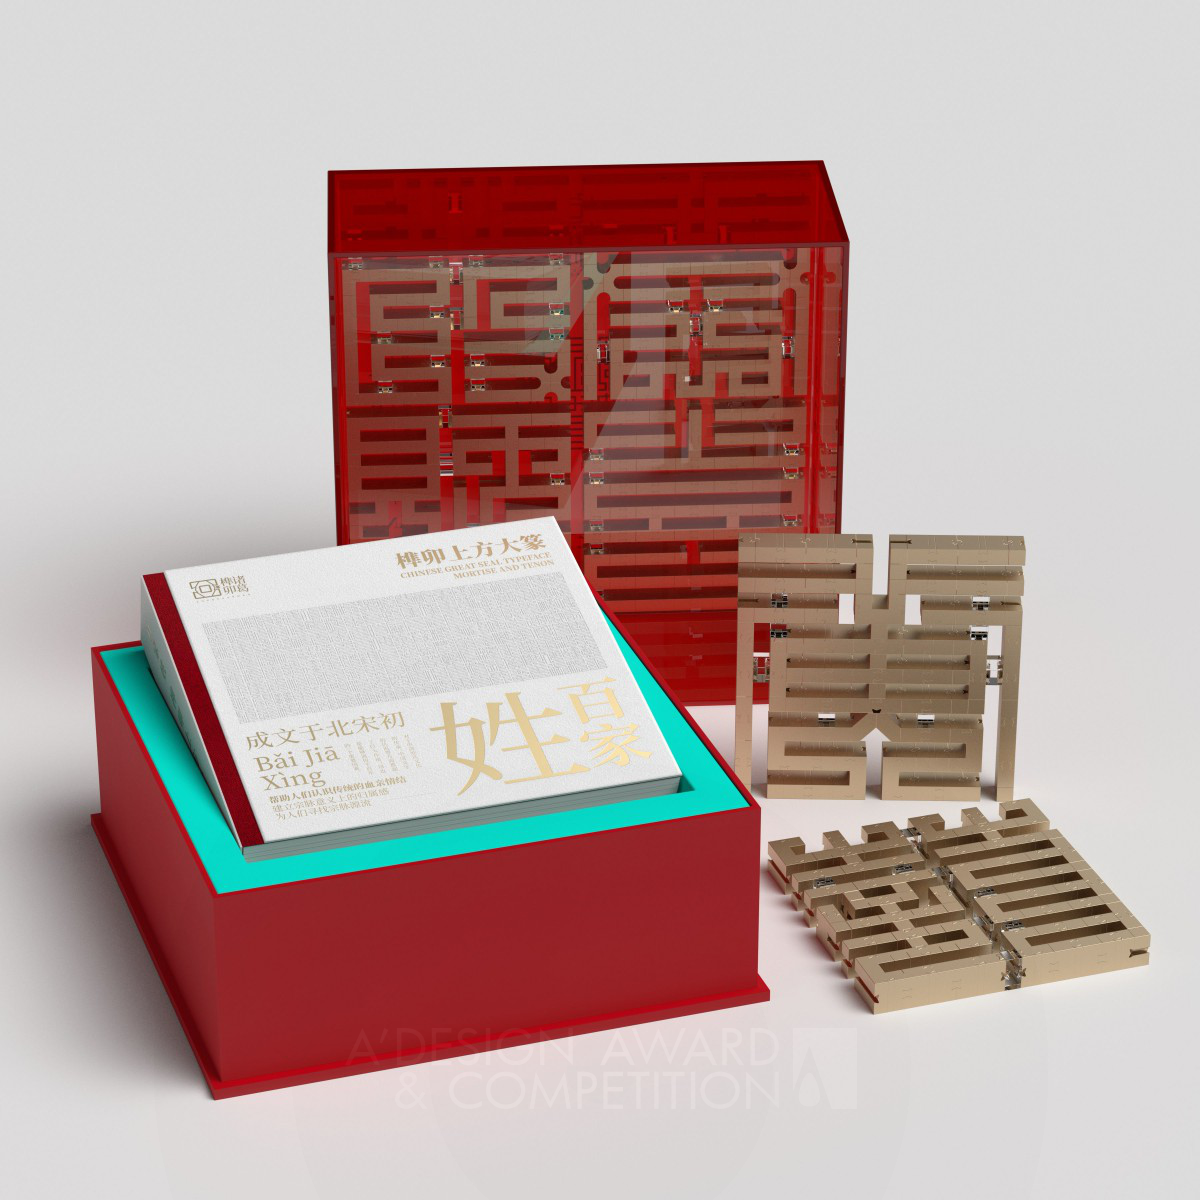 Qiang Gao wins Bronze at the prestigious A' Packaging Design Award with Shangfang Large Seal Script Building Block Packaging.